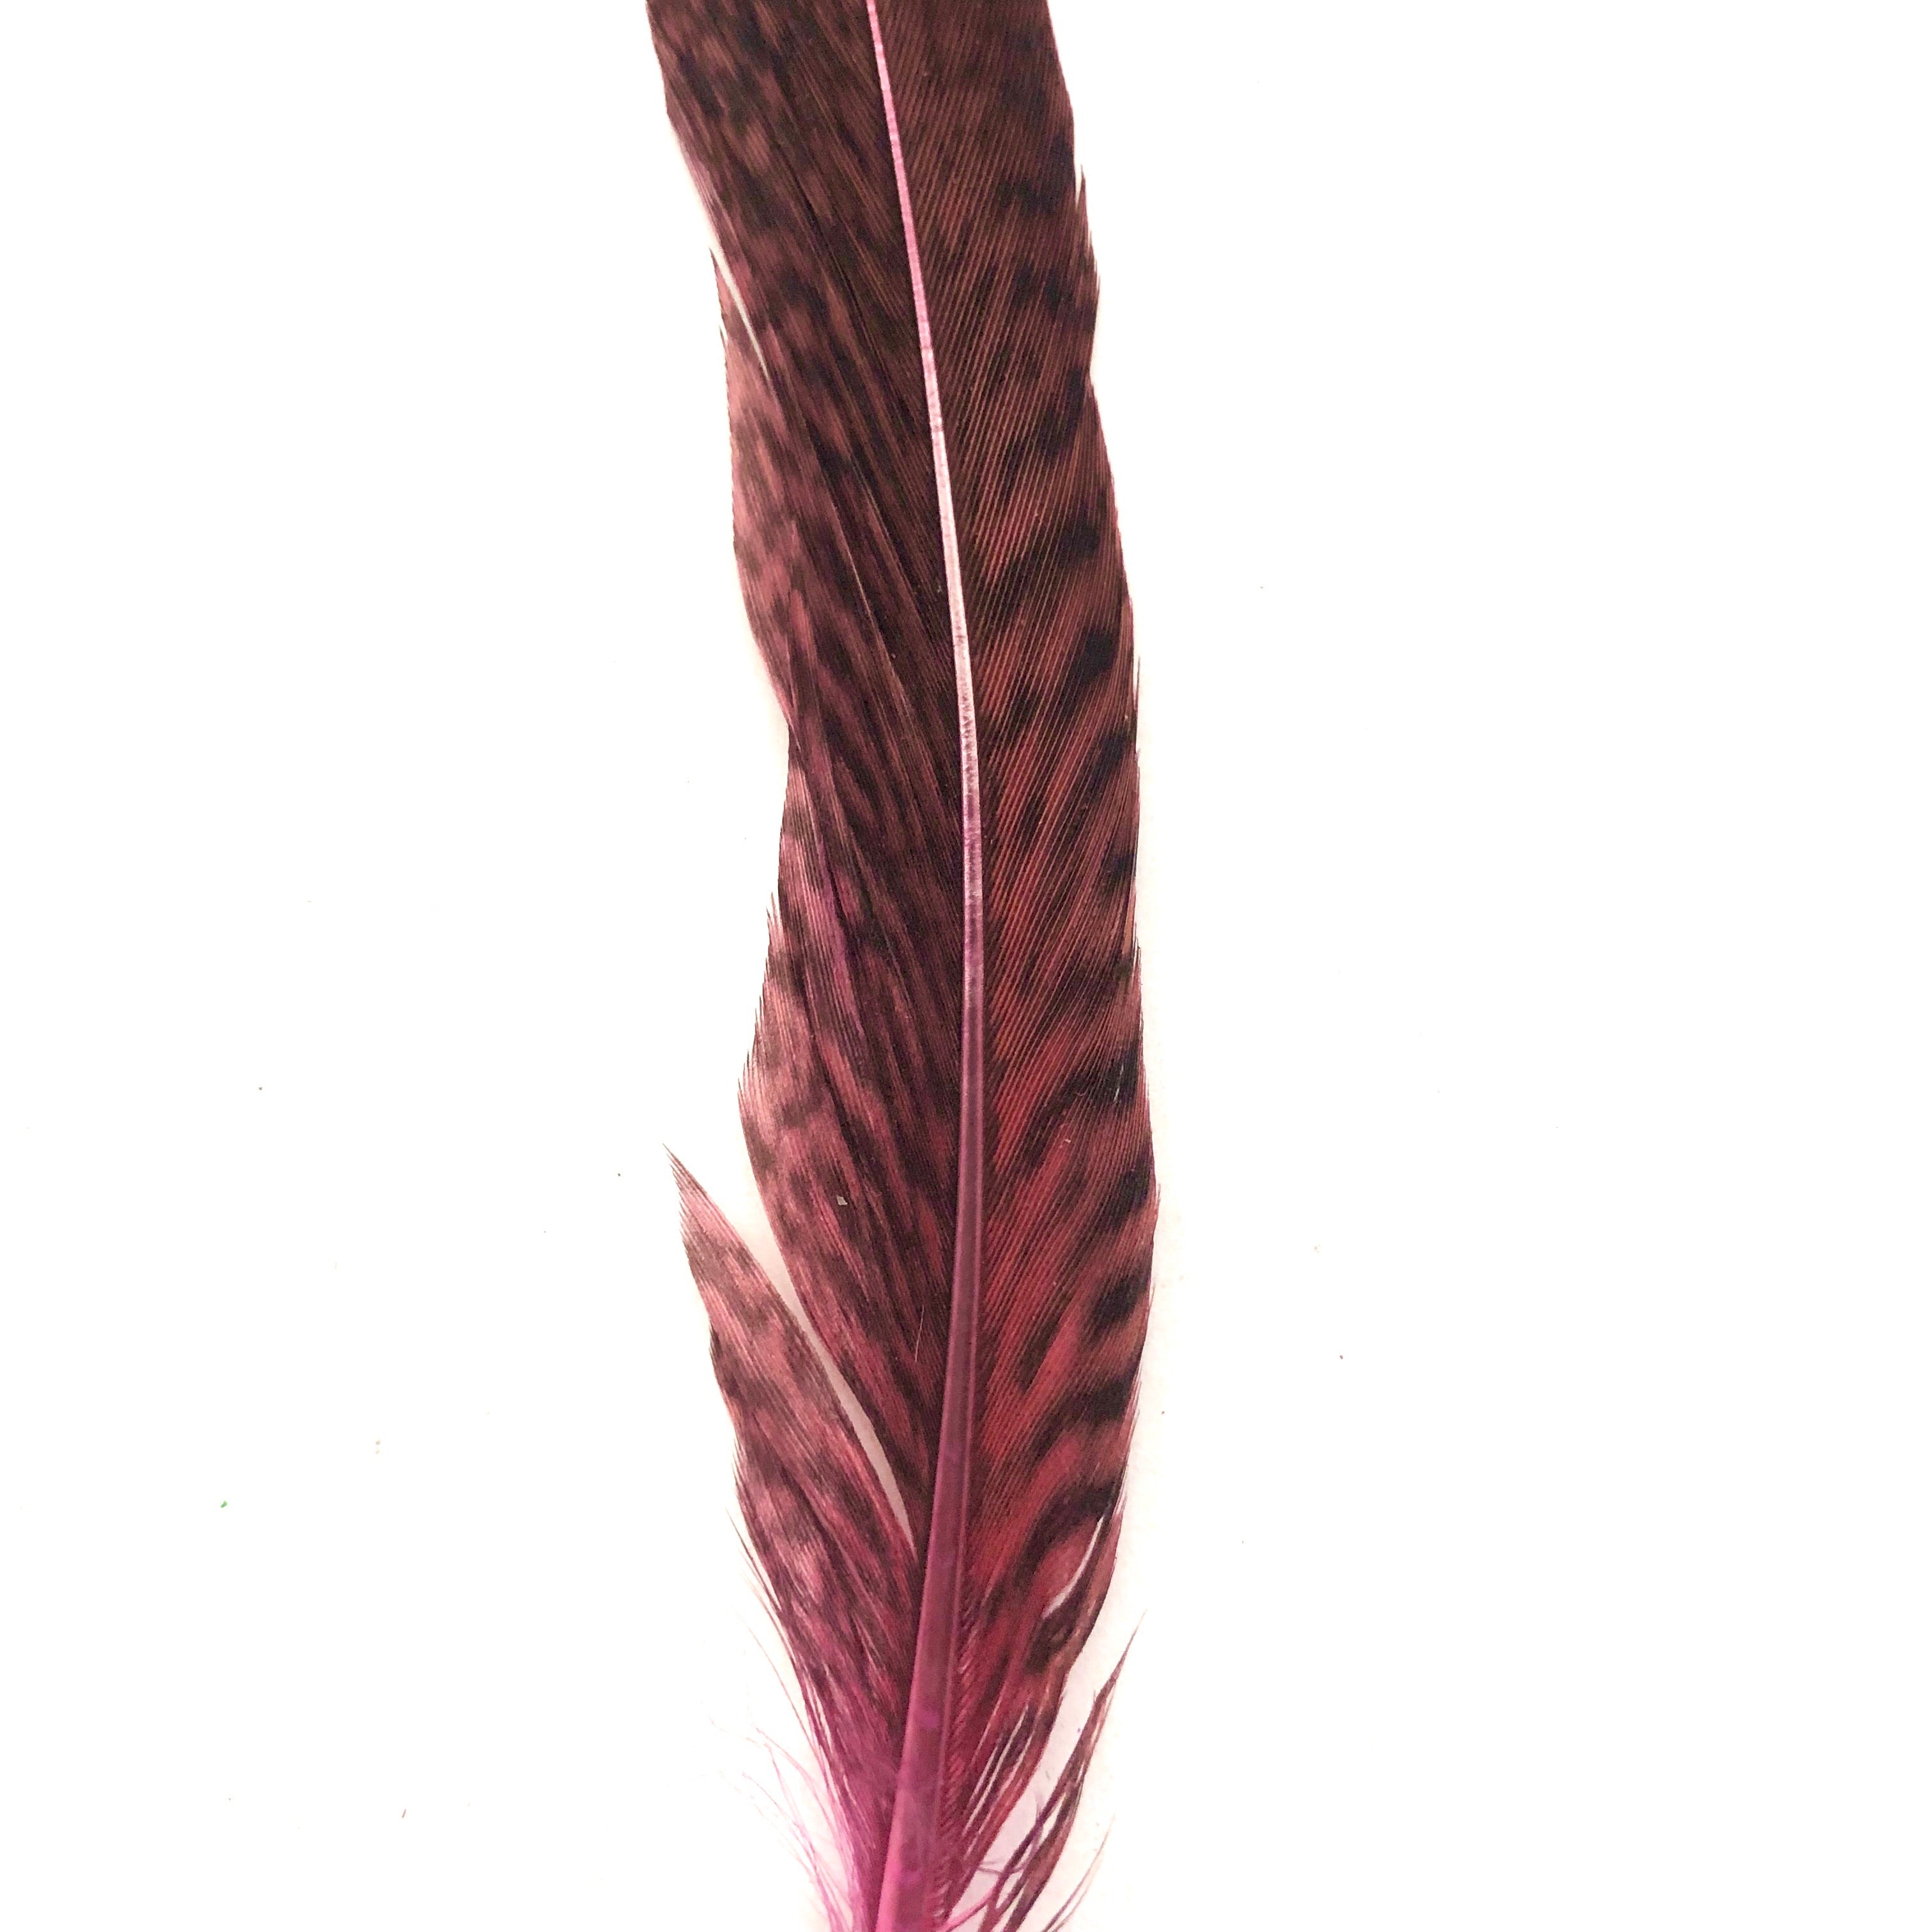 Under 6" Golden Pheasant Side Tail Feather x 10 pcs - Hot Pink